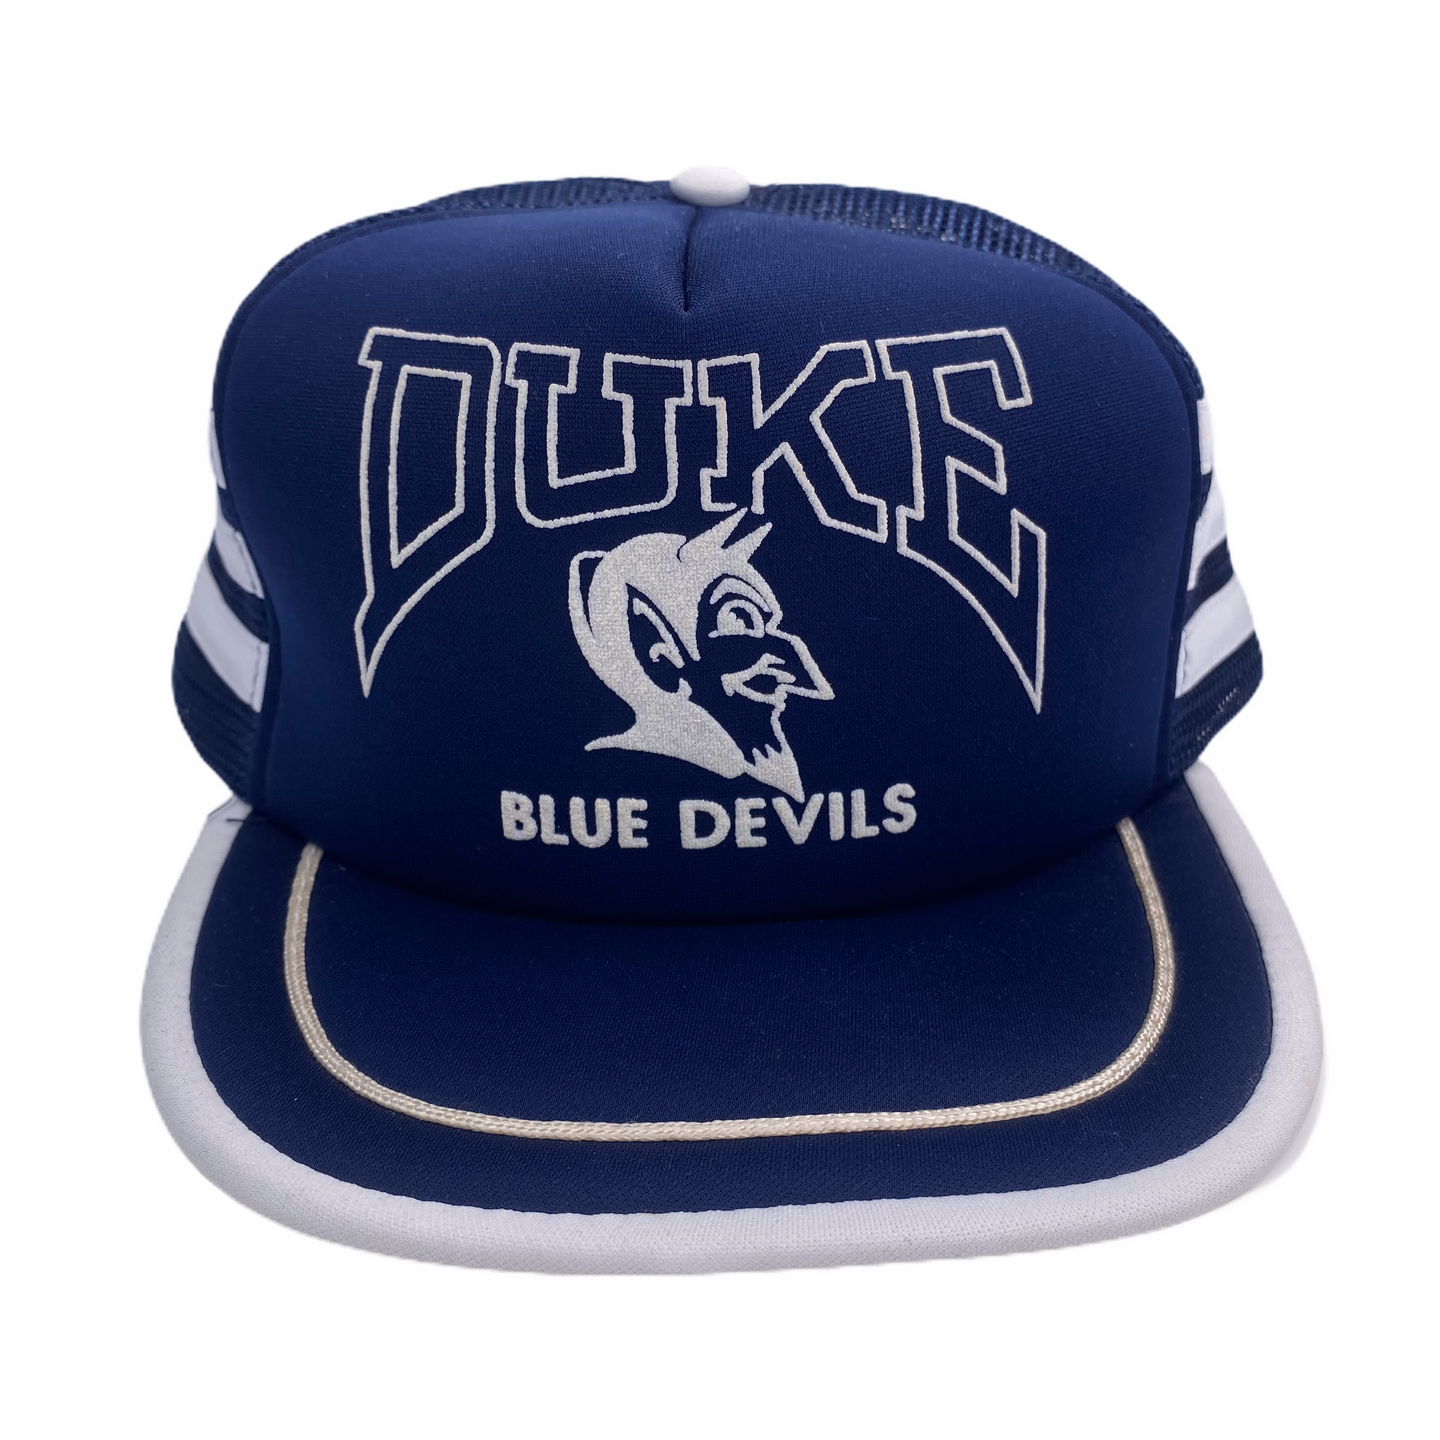 Vintage New Era Duke Fitted Cap, -Great condition